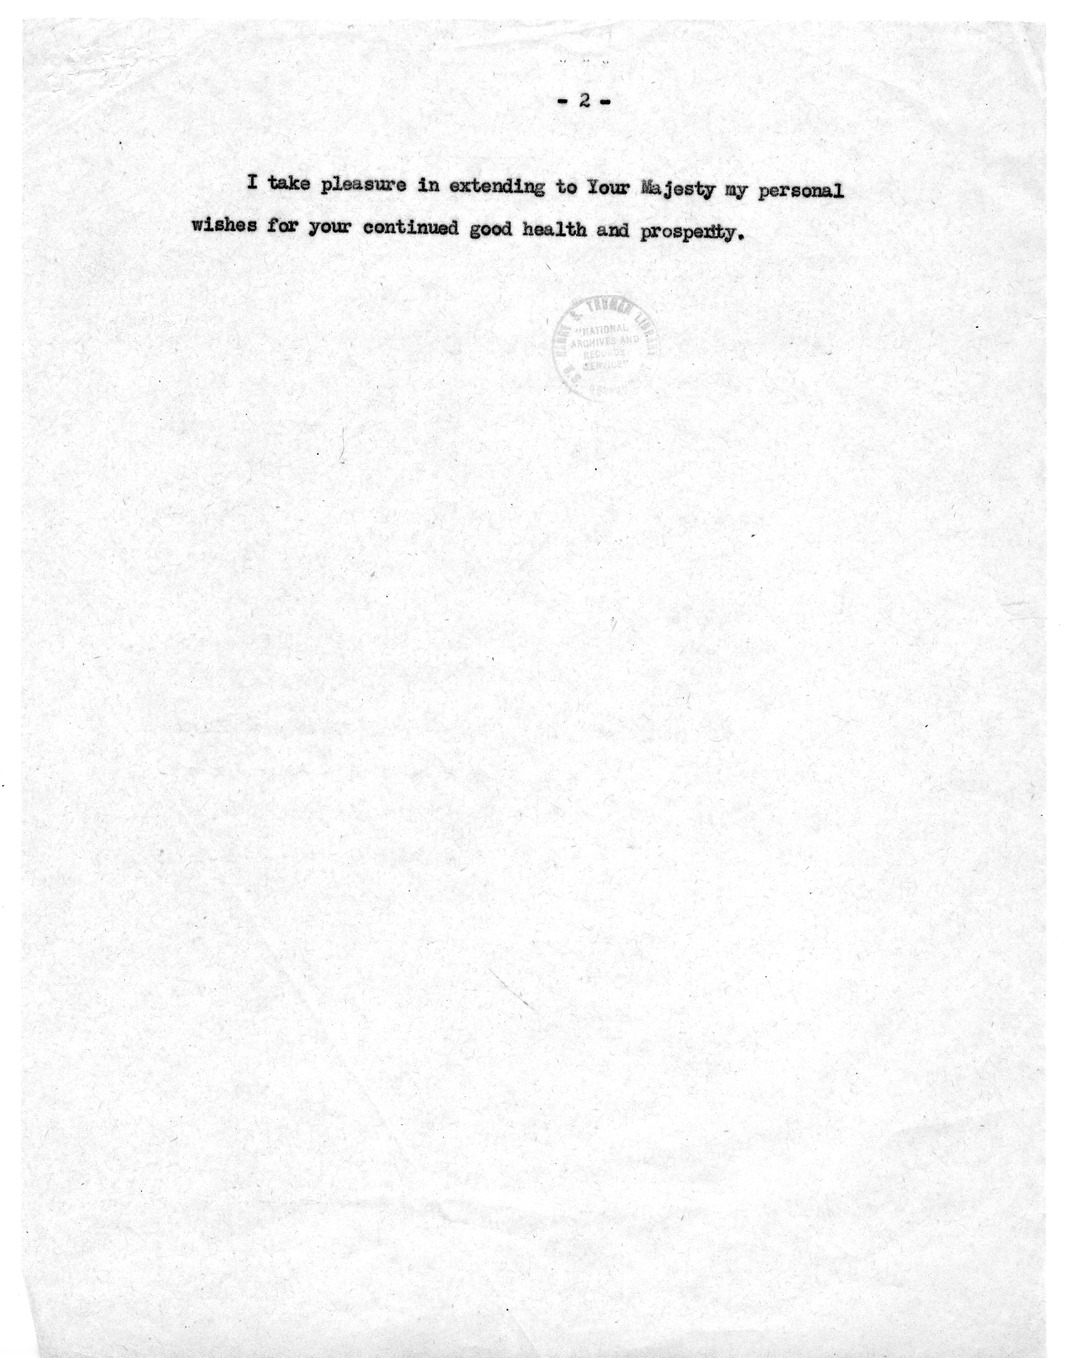 Correspondence Betweeen Secretary of Defense James Forrestal and President Harry S. Truman, with Attachments and Related Material